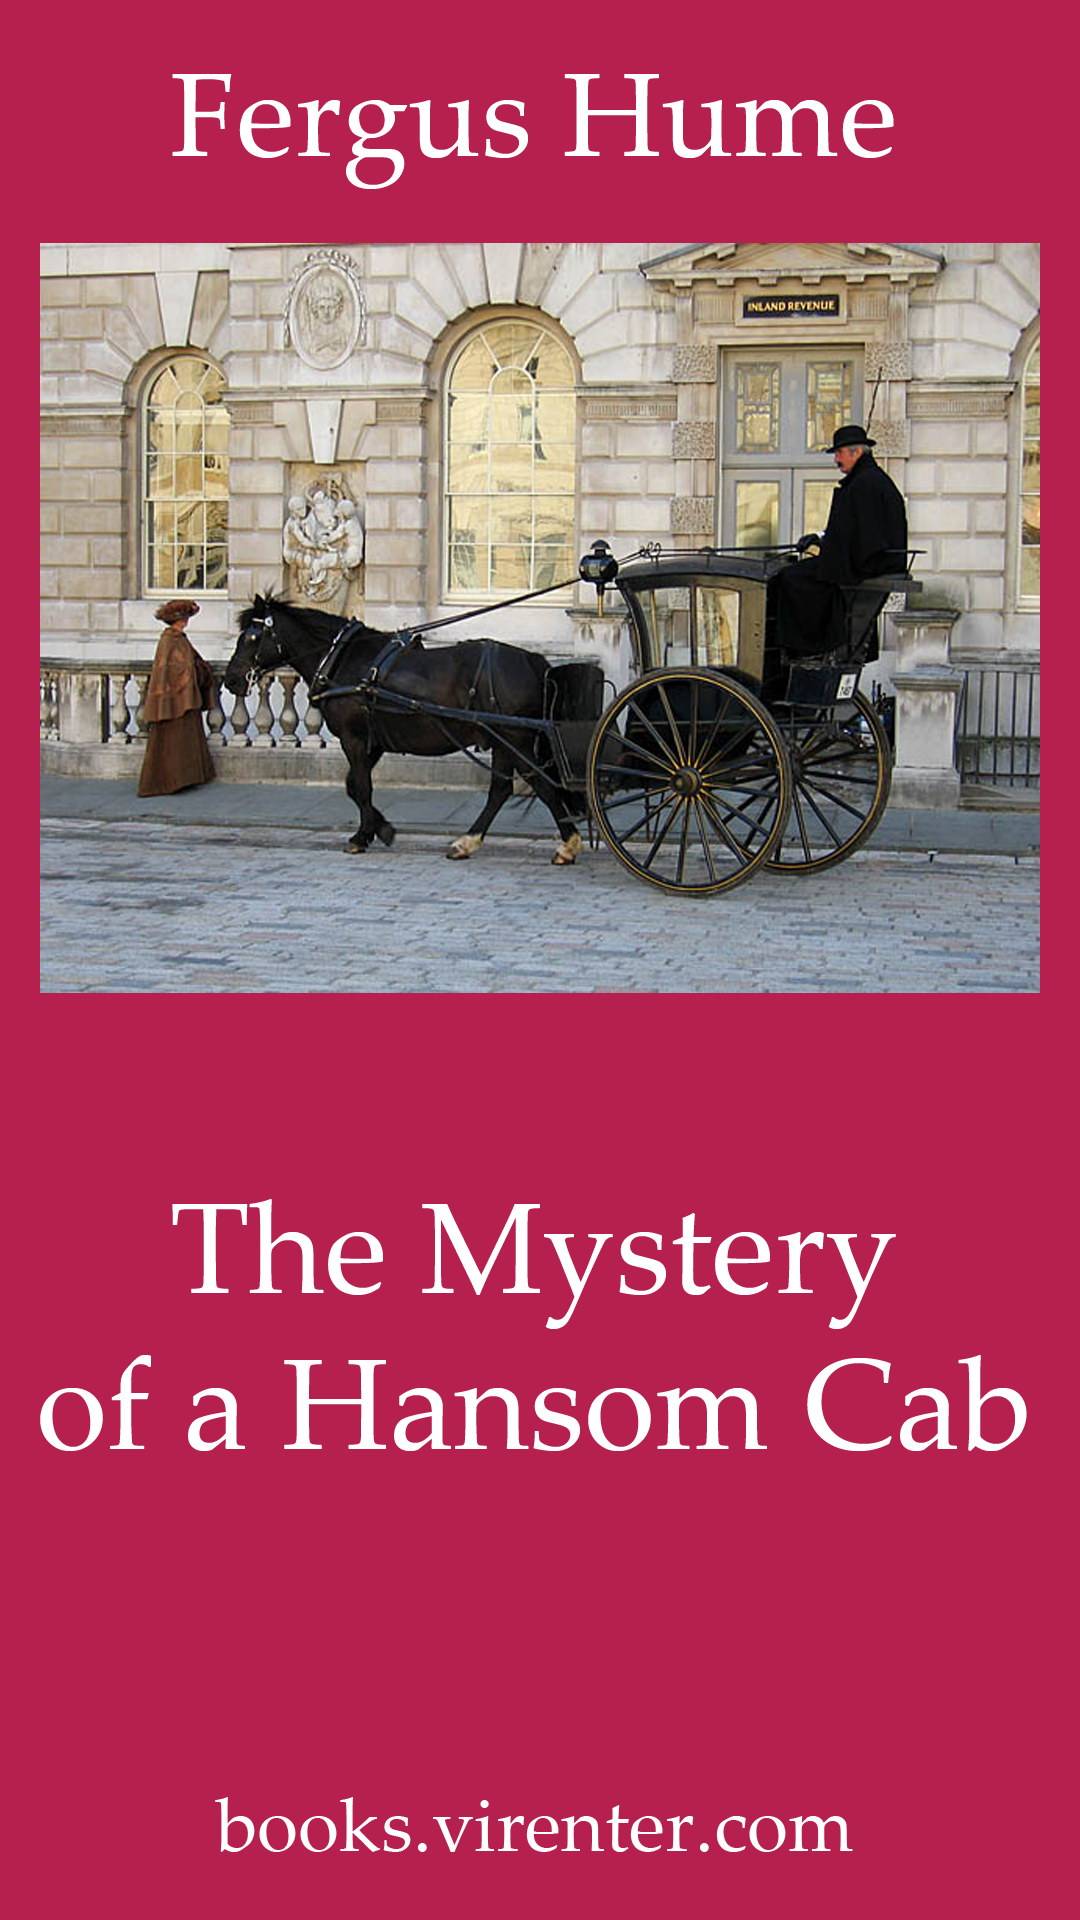 Fergus Hume - The Mystery of a Hansom Cab